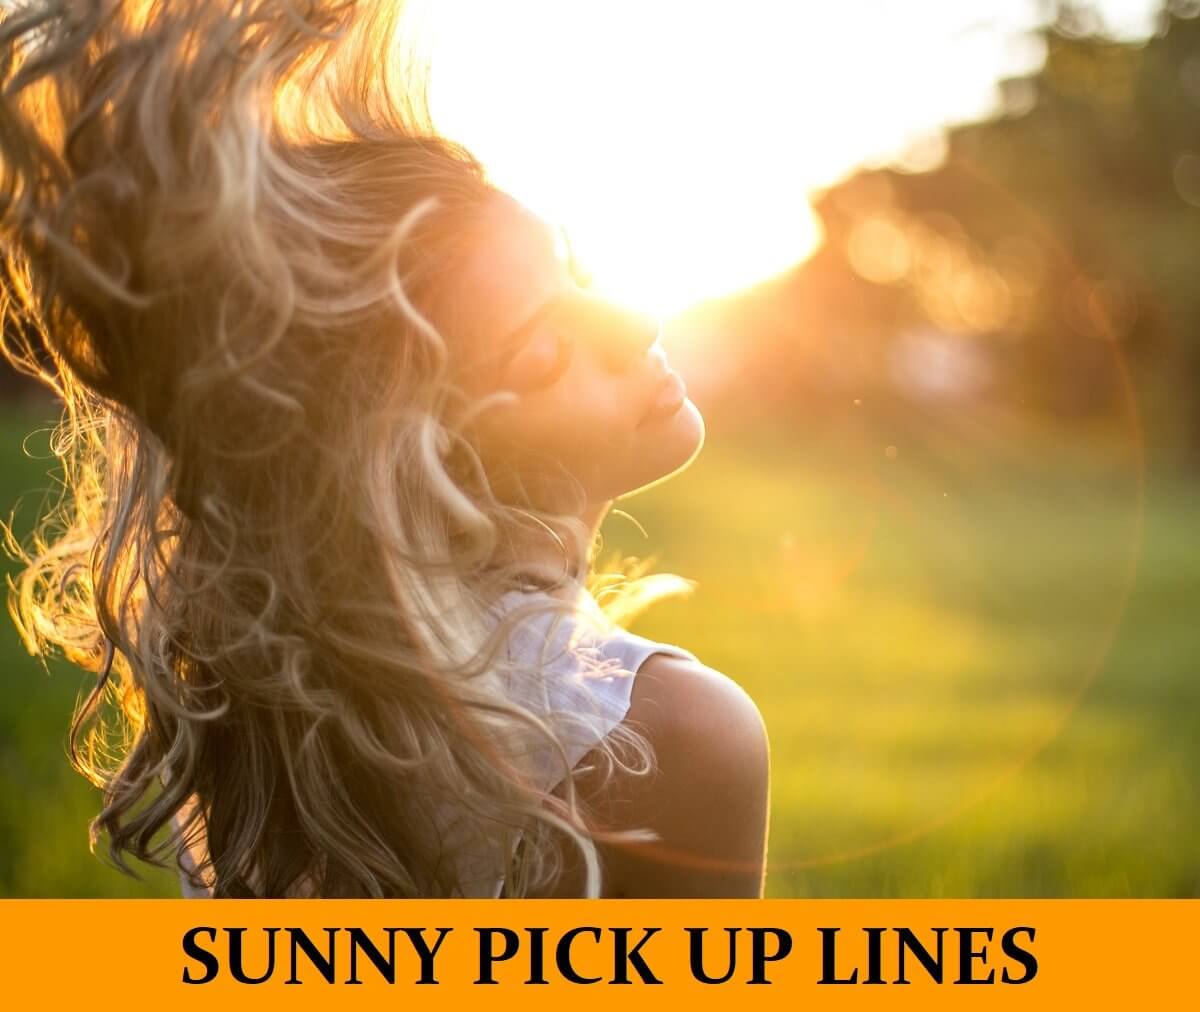 99 Sunny Day and Hot Weather Pick Up Lines [Funny, Dirty, Cheesy]